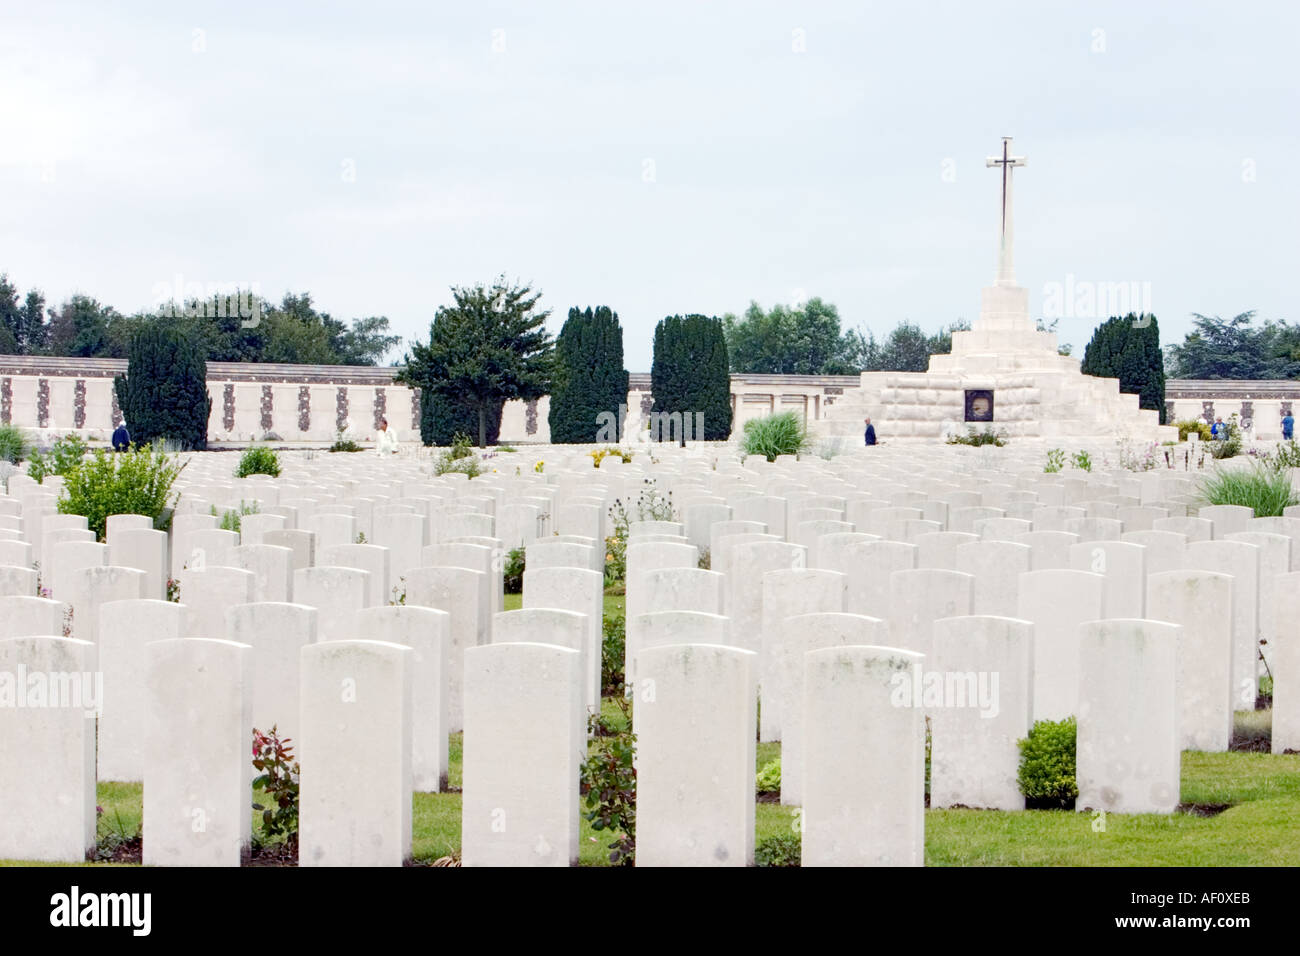 Cross of Sacrifice with graves facing towards it Tyne Cot WW1 Commonwealth Cemetery Passendale Passchendale Flanders Belg Stock Photo